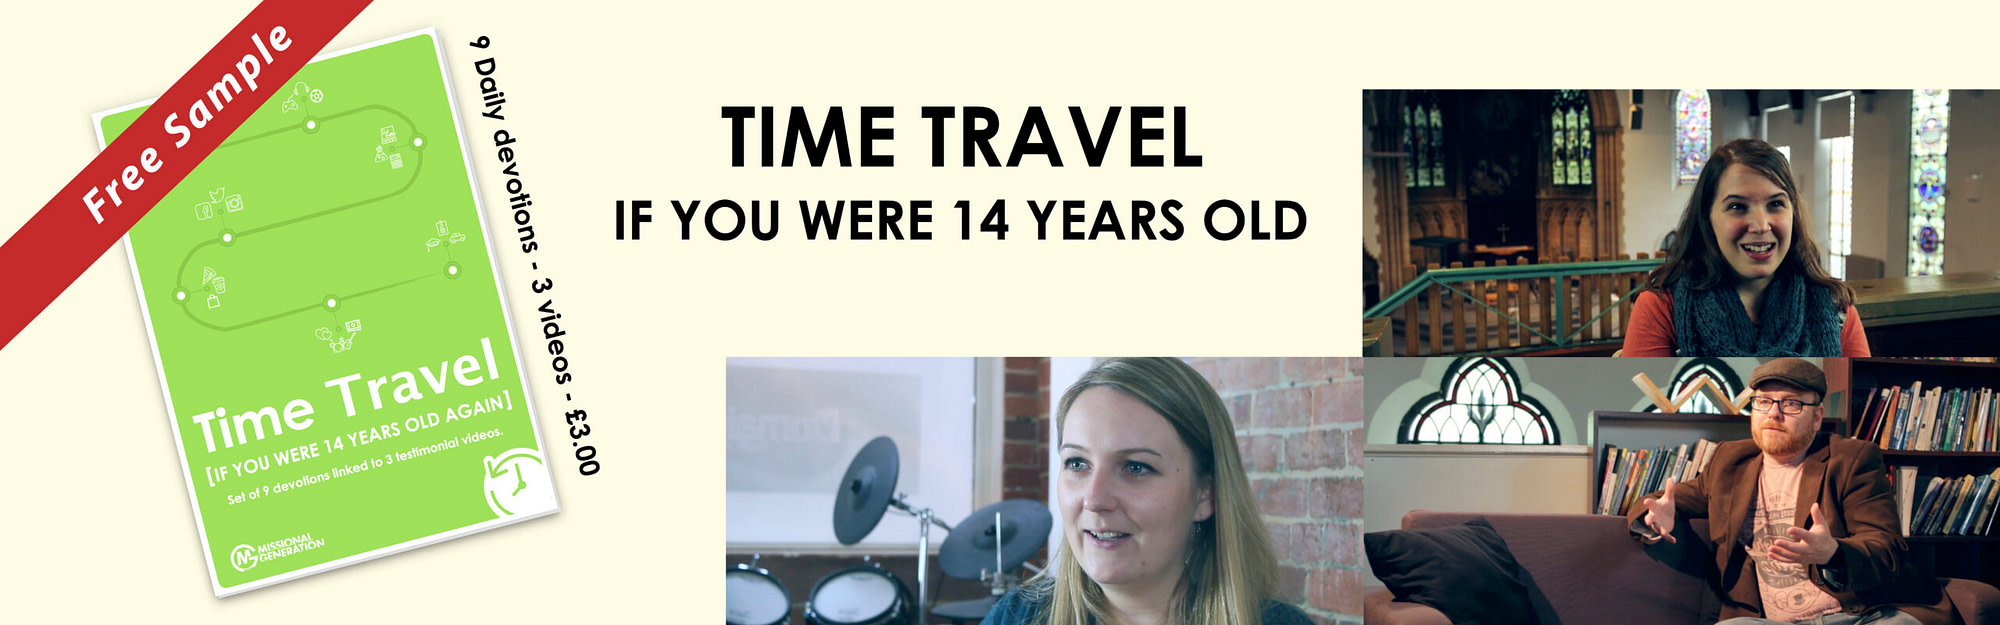 Time Travel: If you were 14 years old